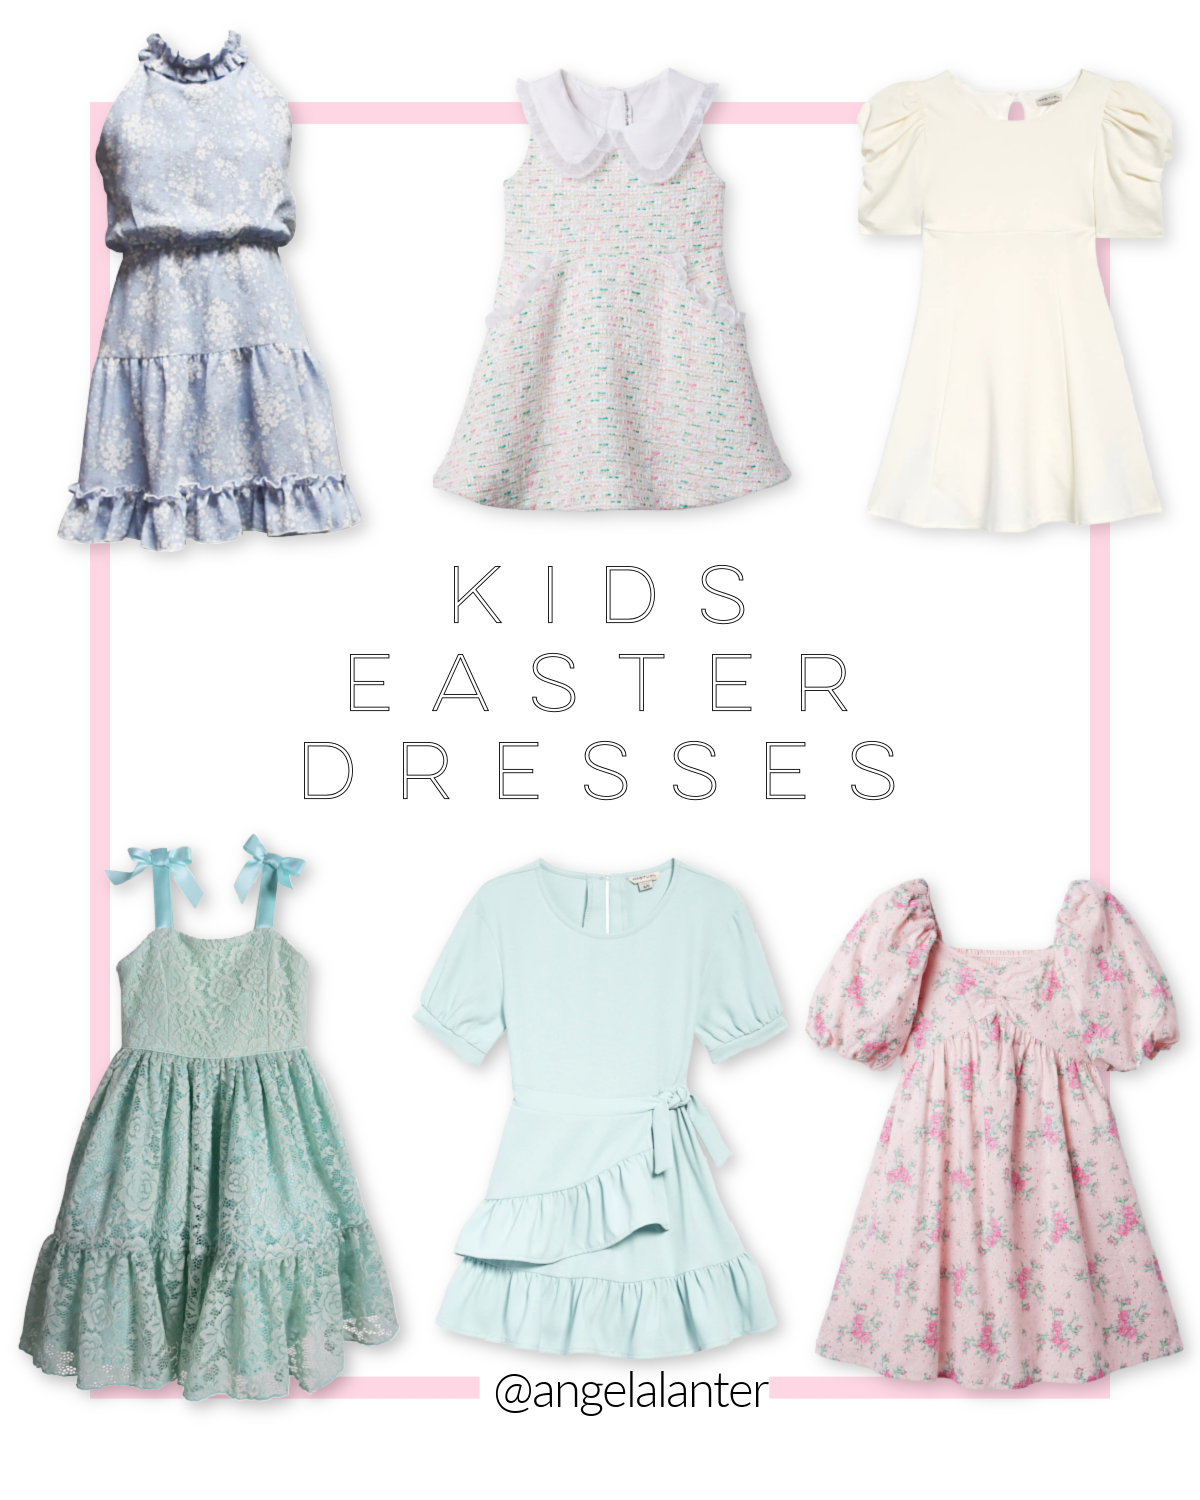 Mommy and me Easter dresses by Angela Lanter 2022